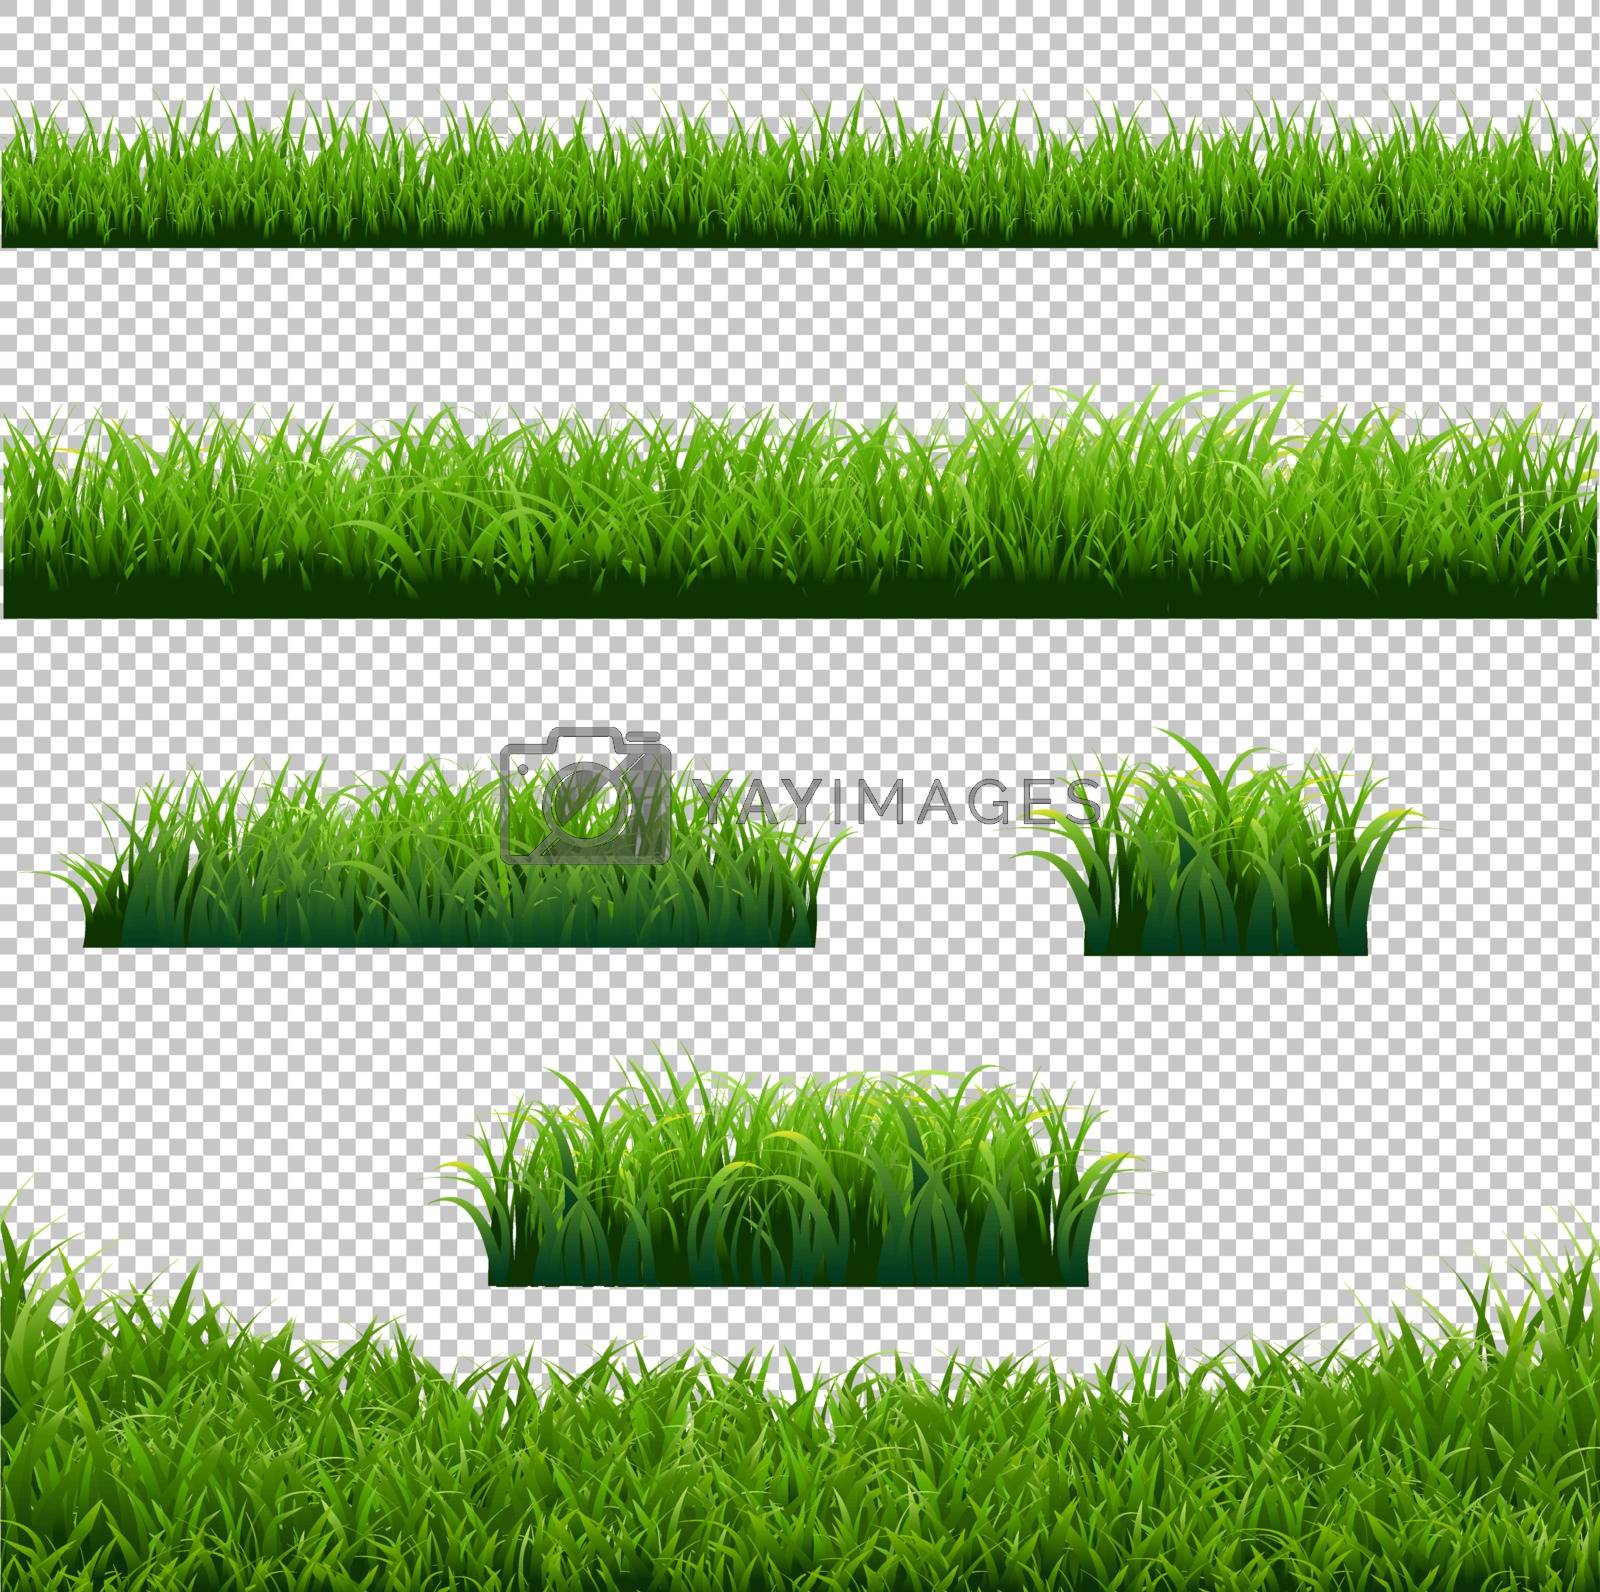 Royalty free image of Green Grass Borders Big Set Transparent Background by adamson